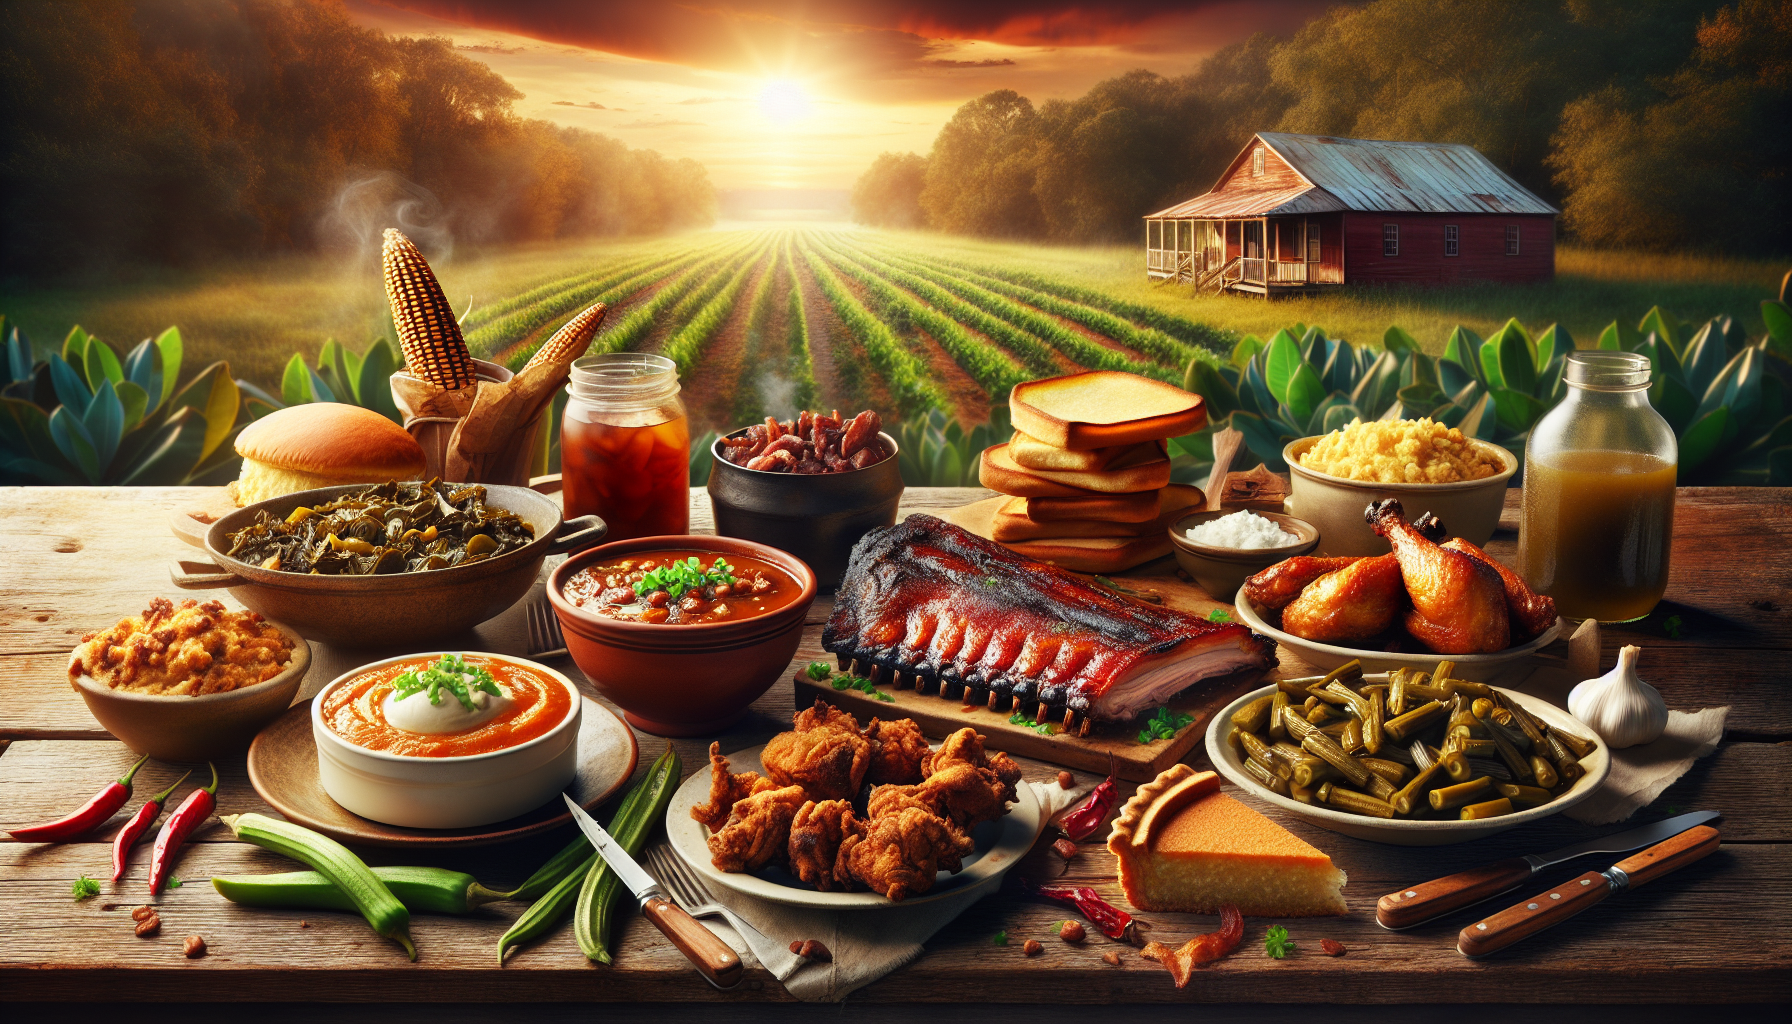 How Would You Define Southern Cuisine?